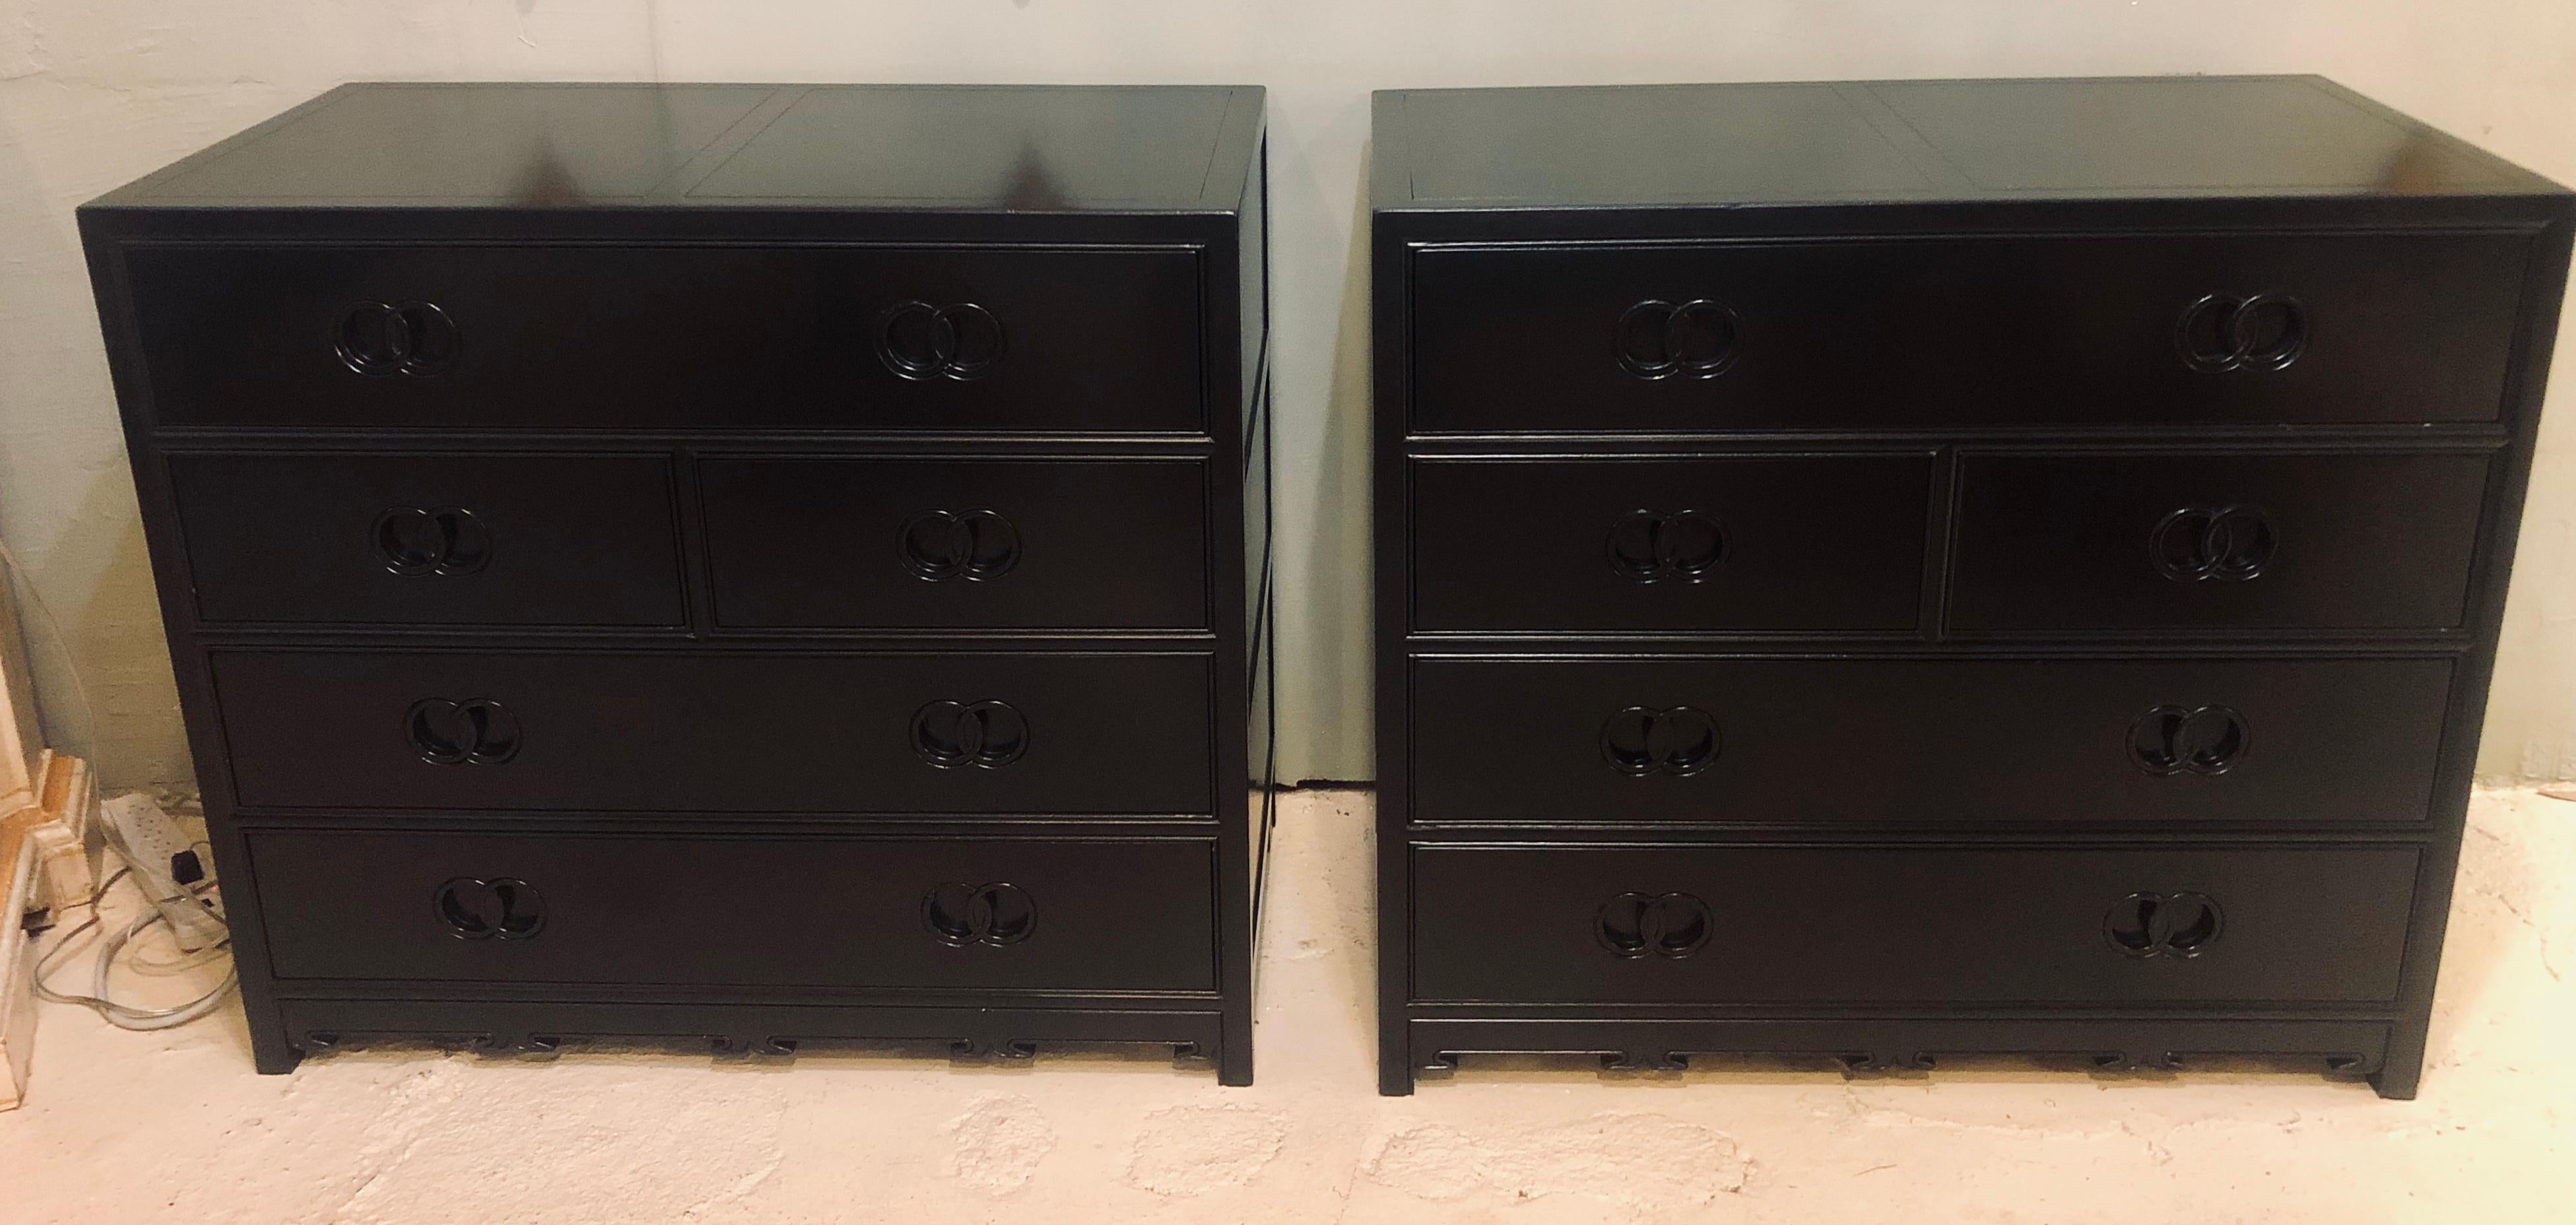 Pair of Hollywood Regency style Ebony Michael Taylor designed chests for baker. This stunning Steinway black lacquered chests, commodes or nightstands have been professionally done over and are simply spectacular. The large five drawer chests having